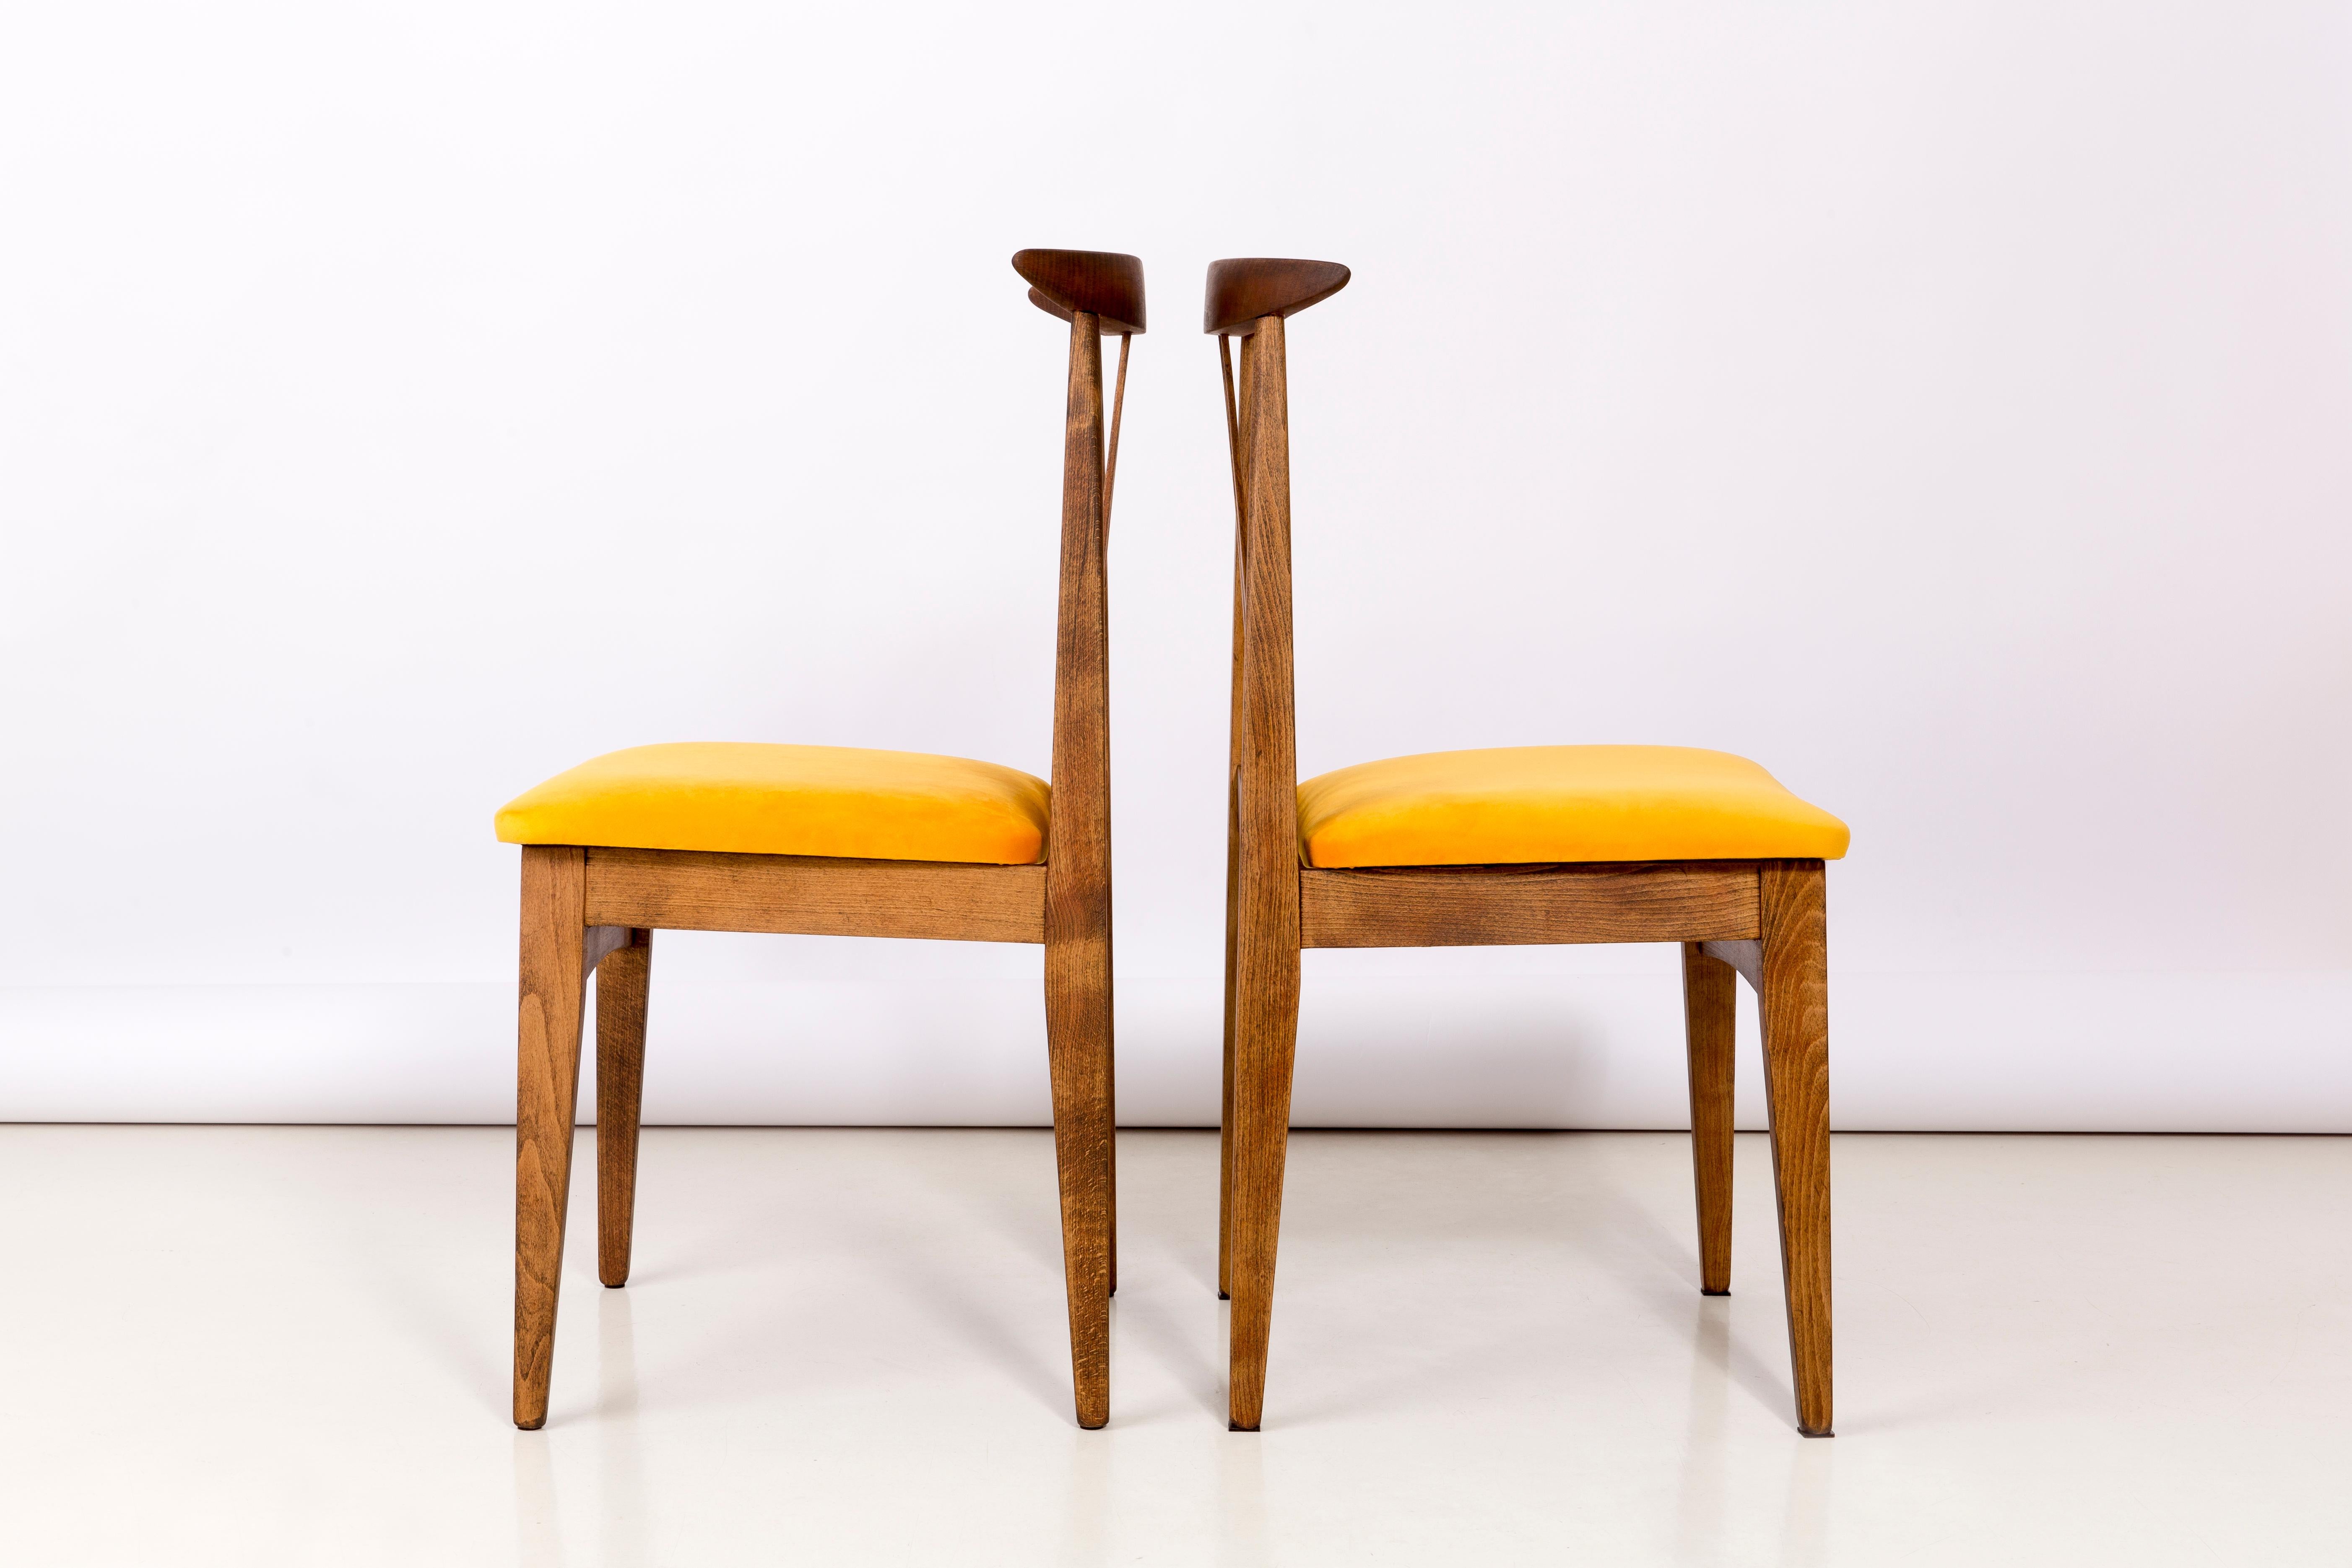 Hand-Crafted Set of Ten Yellow Chairs, by Zielinski, Europe, 1960s For Sale